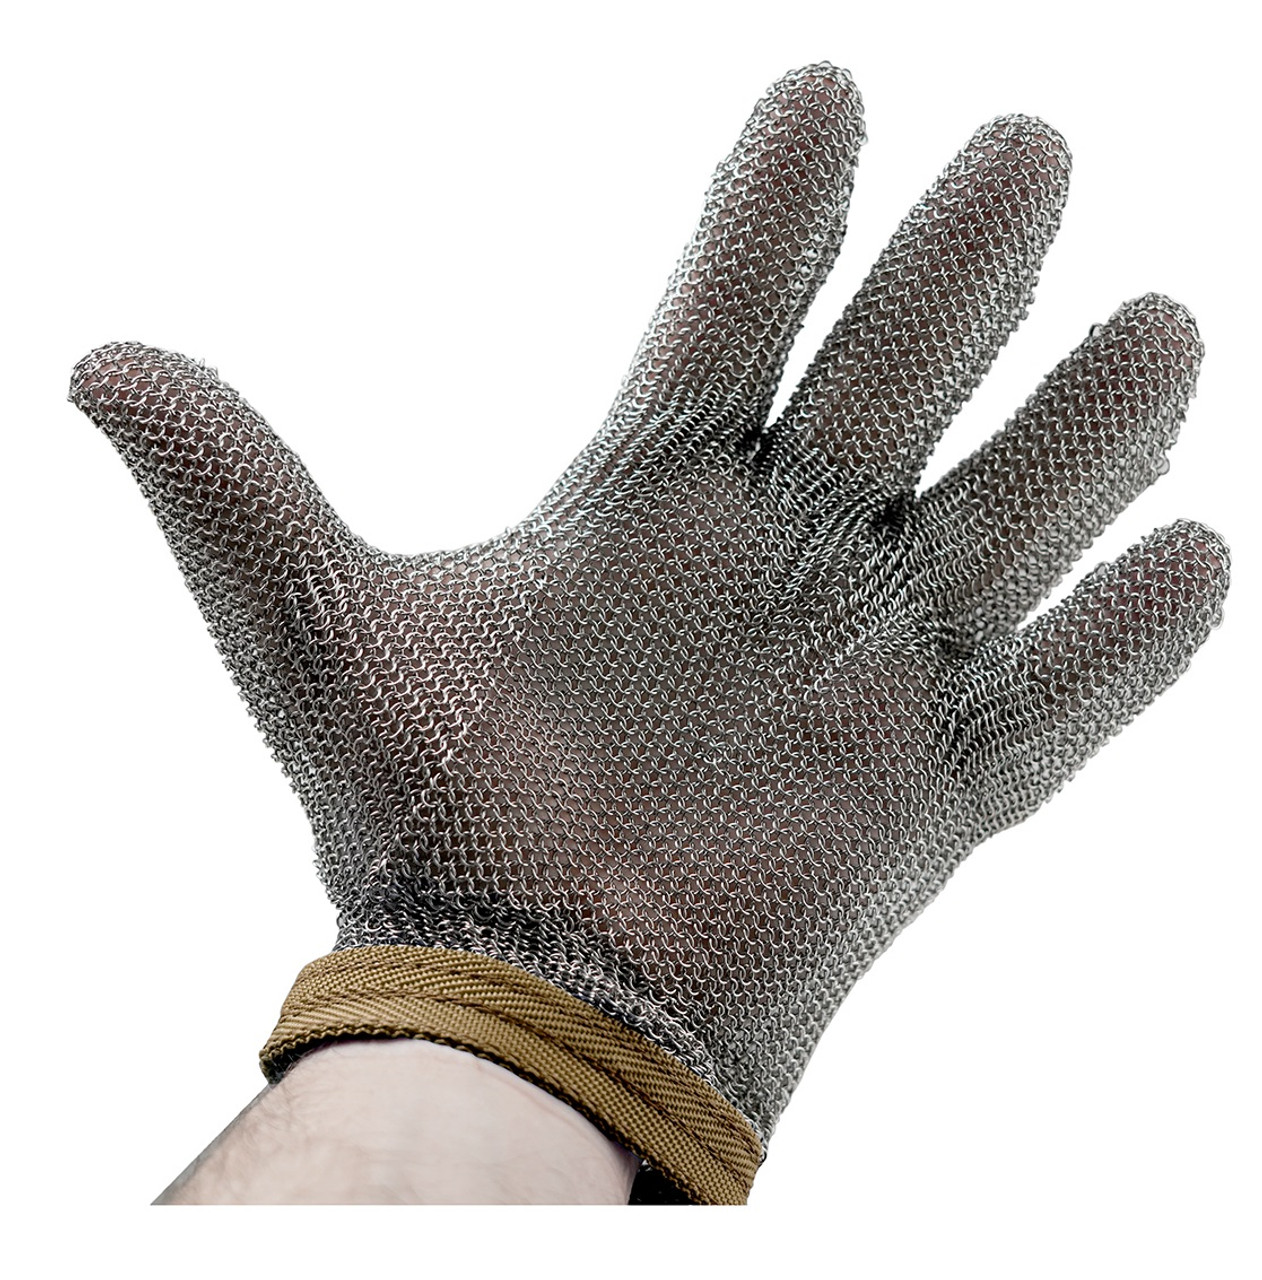 https://cdn11.bigcommerce.com/s-3n1nnt5qyw/images/stencil/1280x1280/products/4572/5199/gps-safety-glove-stainless-xxlarge-model-515-xxl-14__93182.1629741266.jpg?c=1